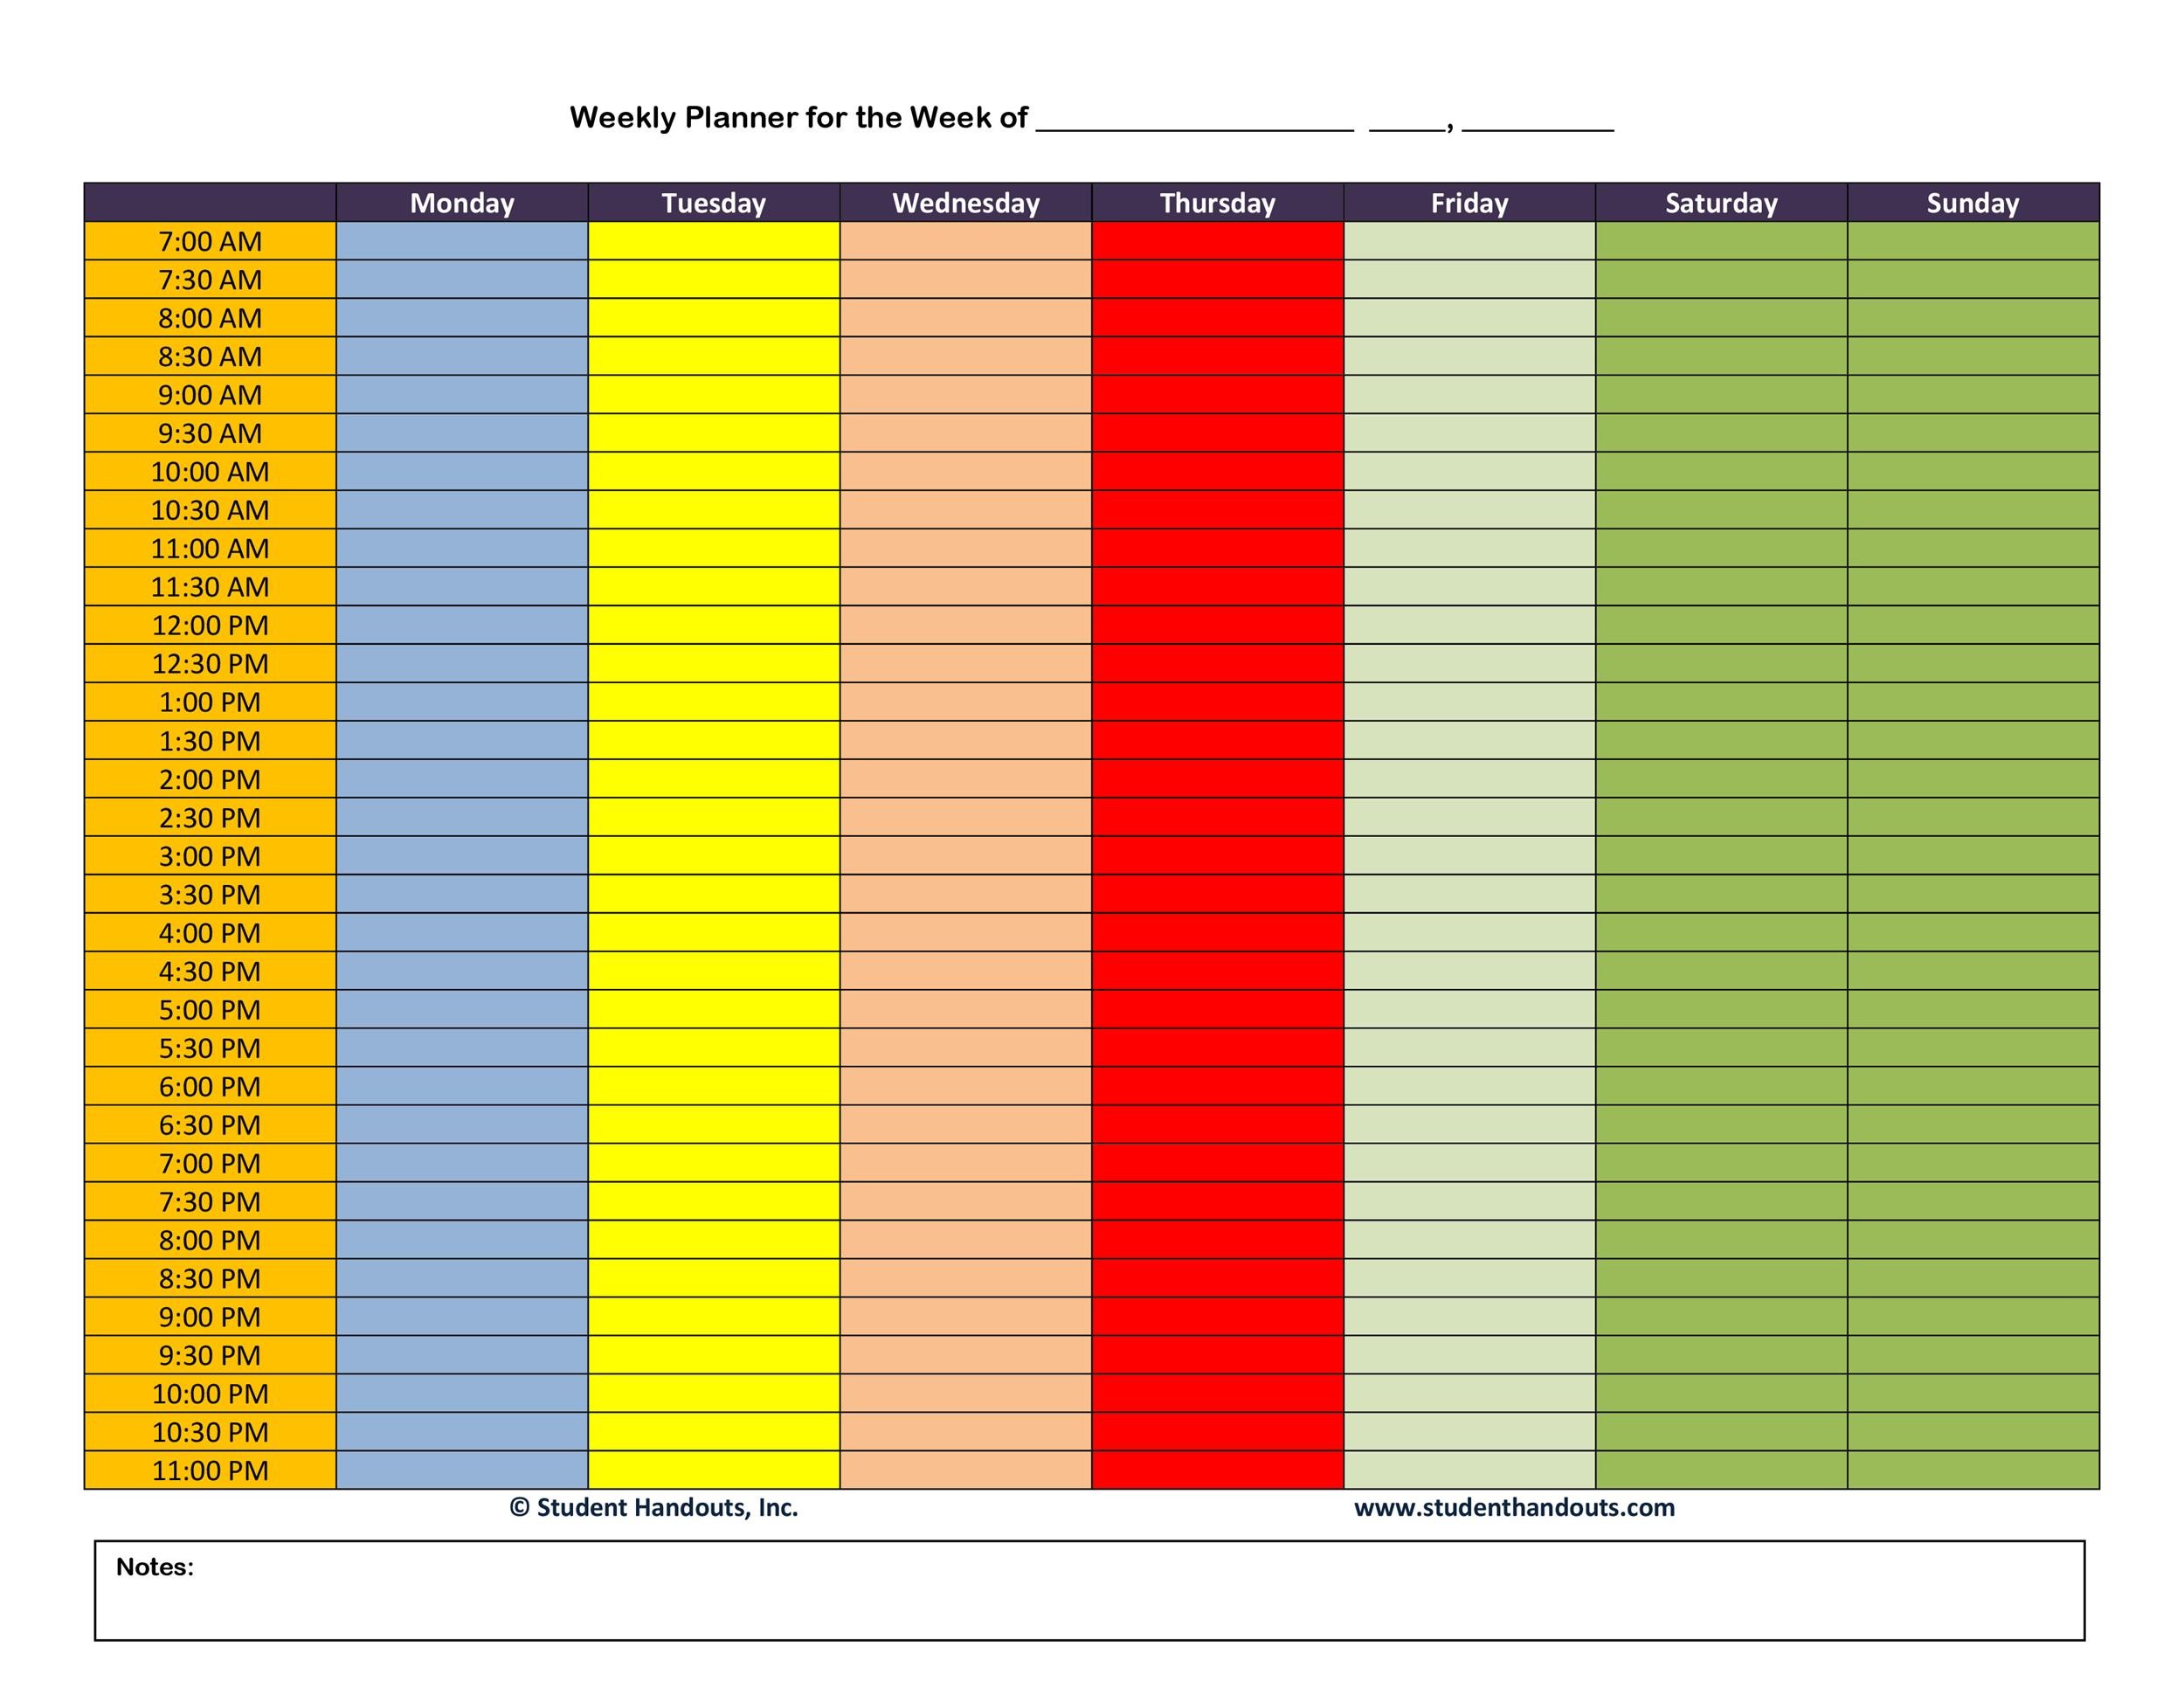 weekly planner template excel free download